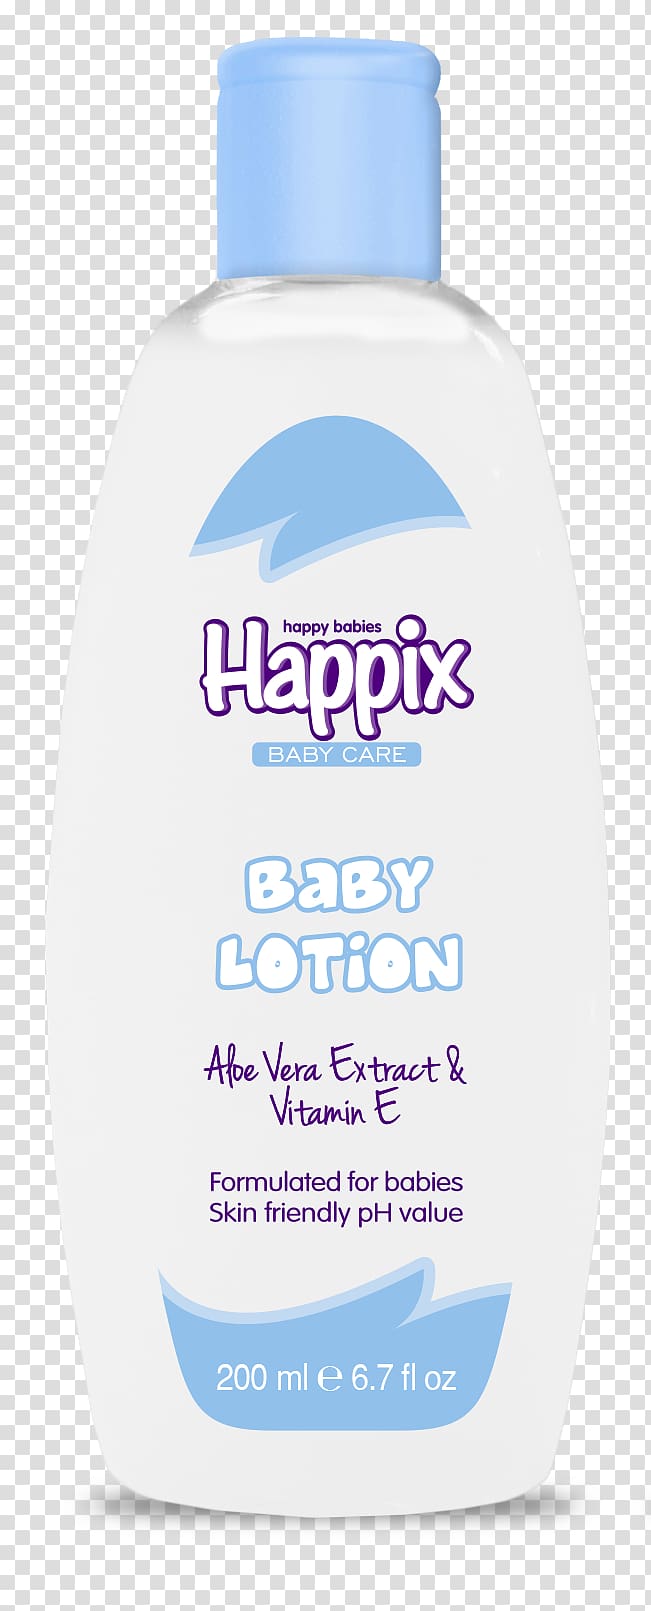 Lotion Product Shower gel, baby shampoo transparent background PNG clipart